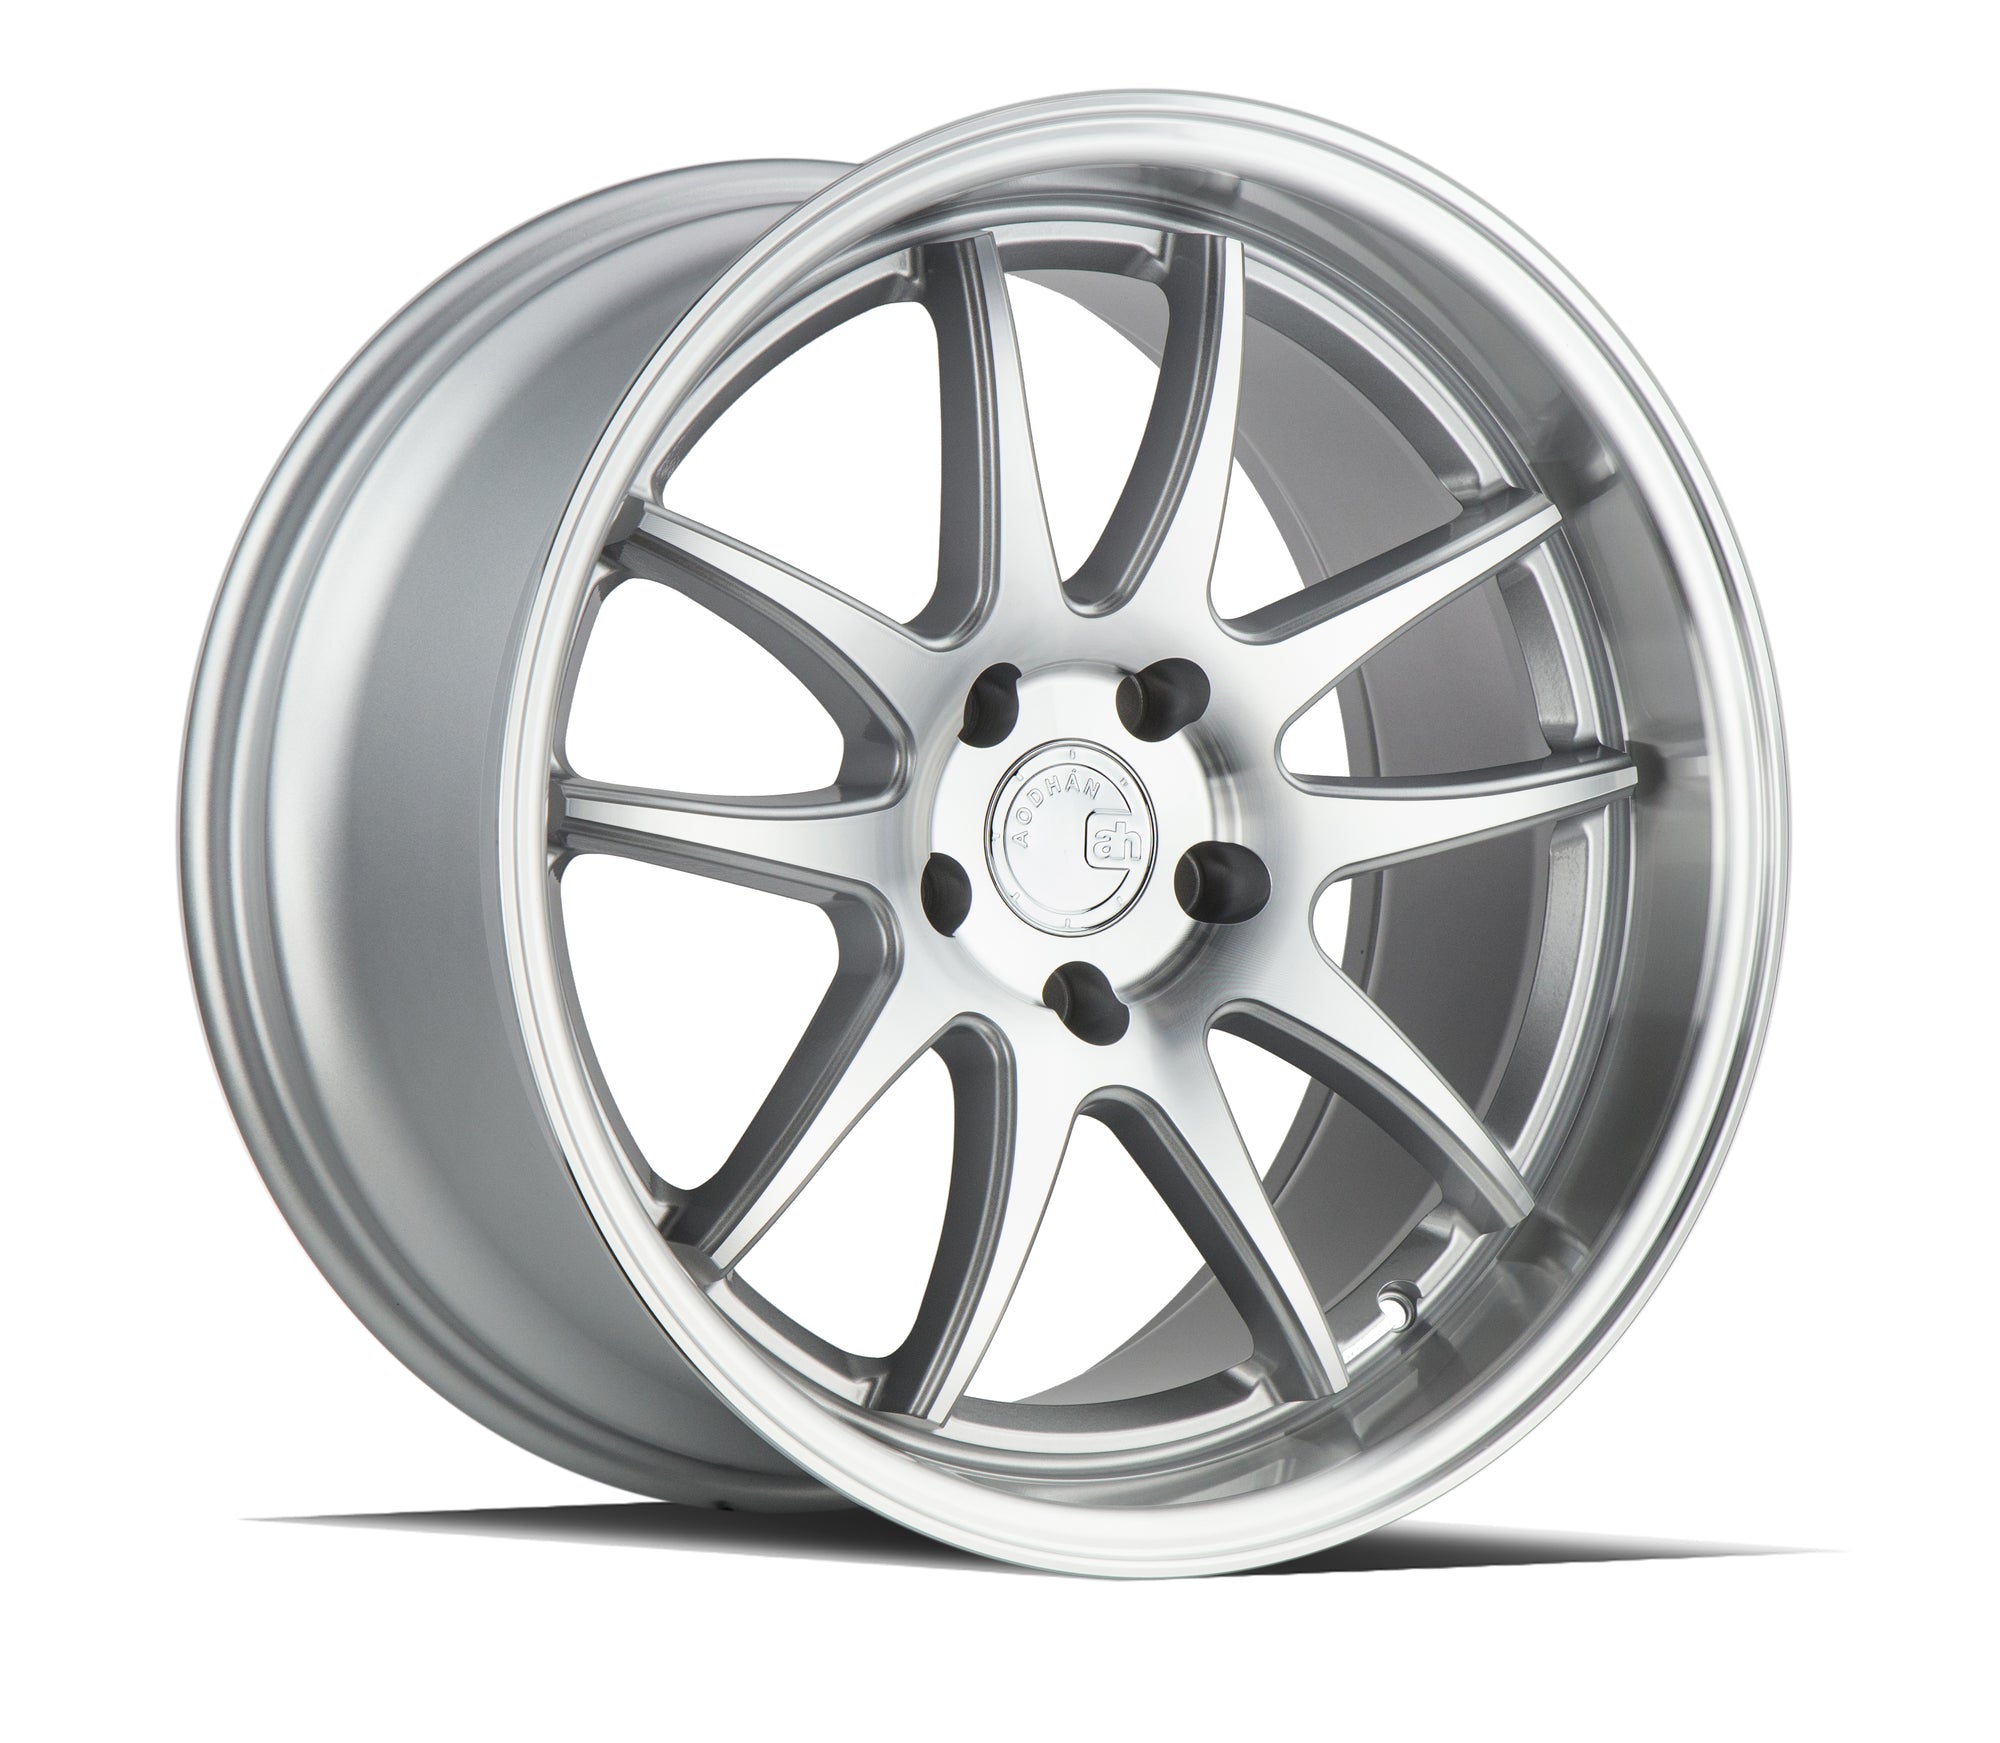 Aodhan DS02 18x9.5 5x114.3 +30 Silver w/Machined Face